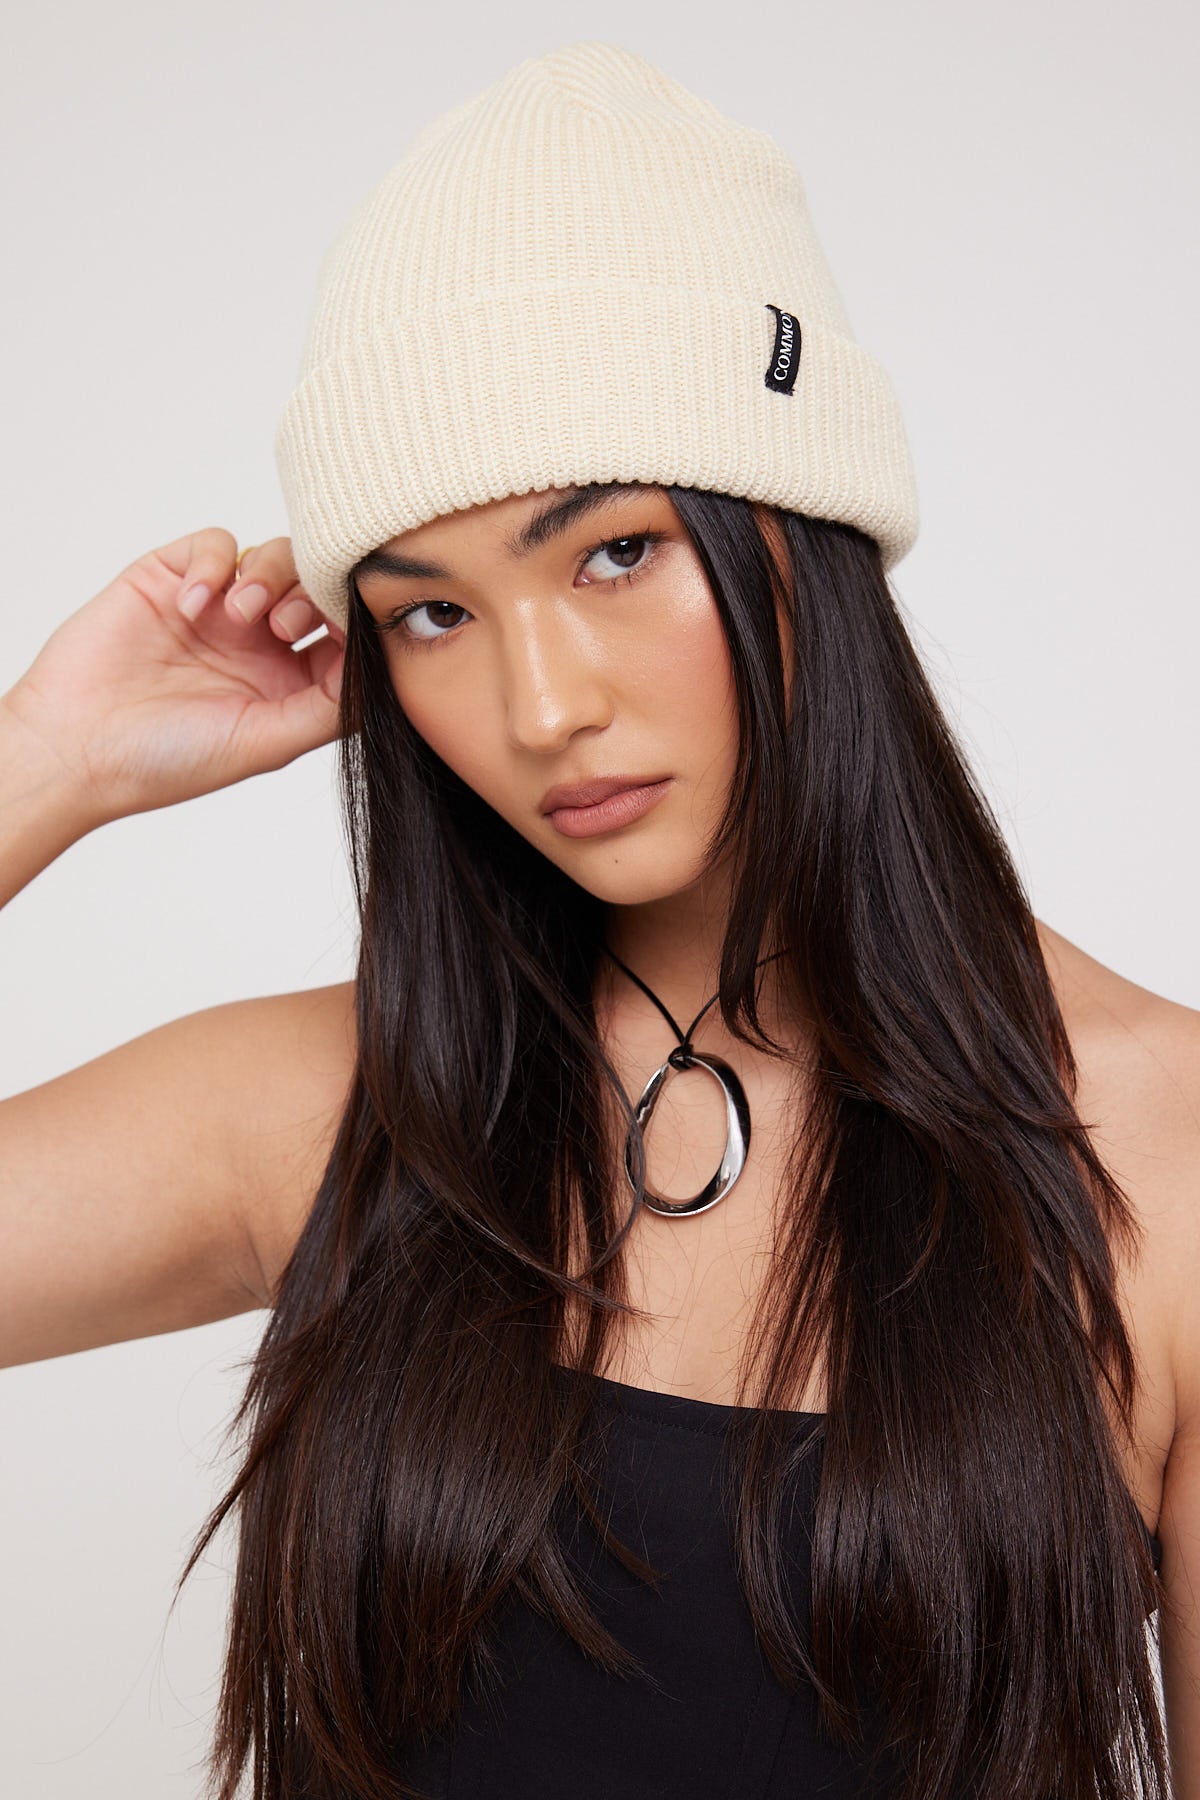 Common Need Better Low Profile Beanie Off White